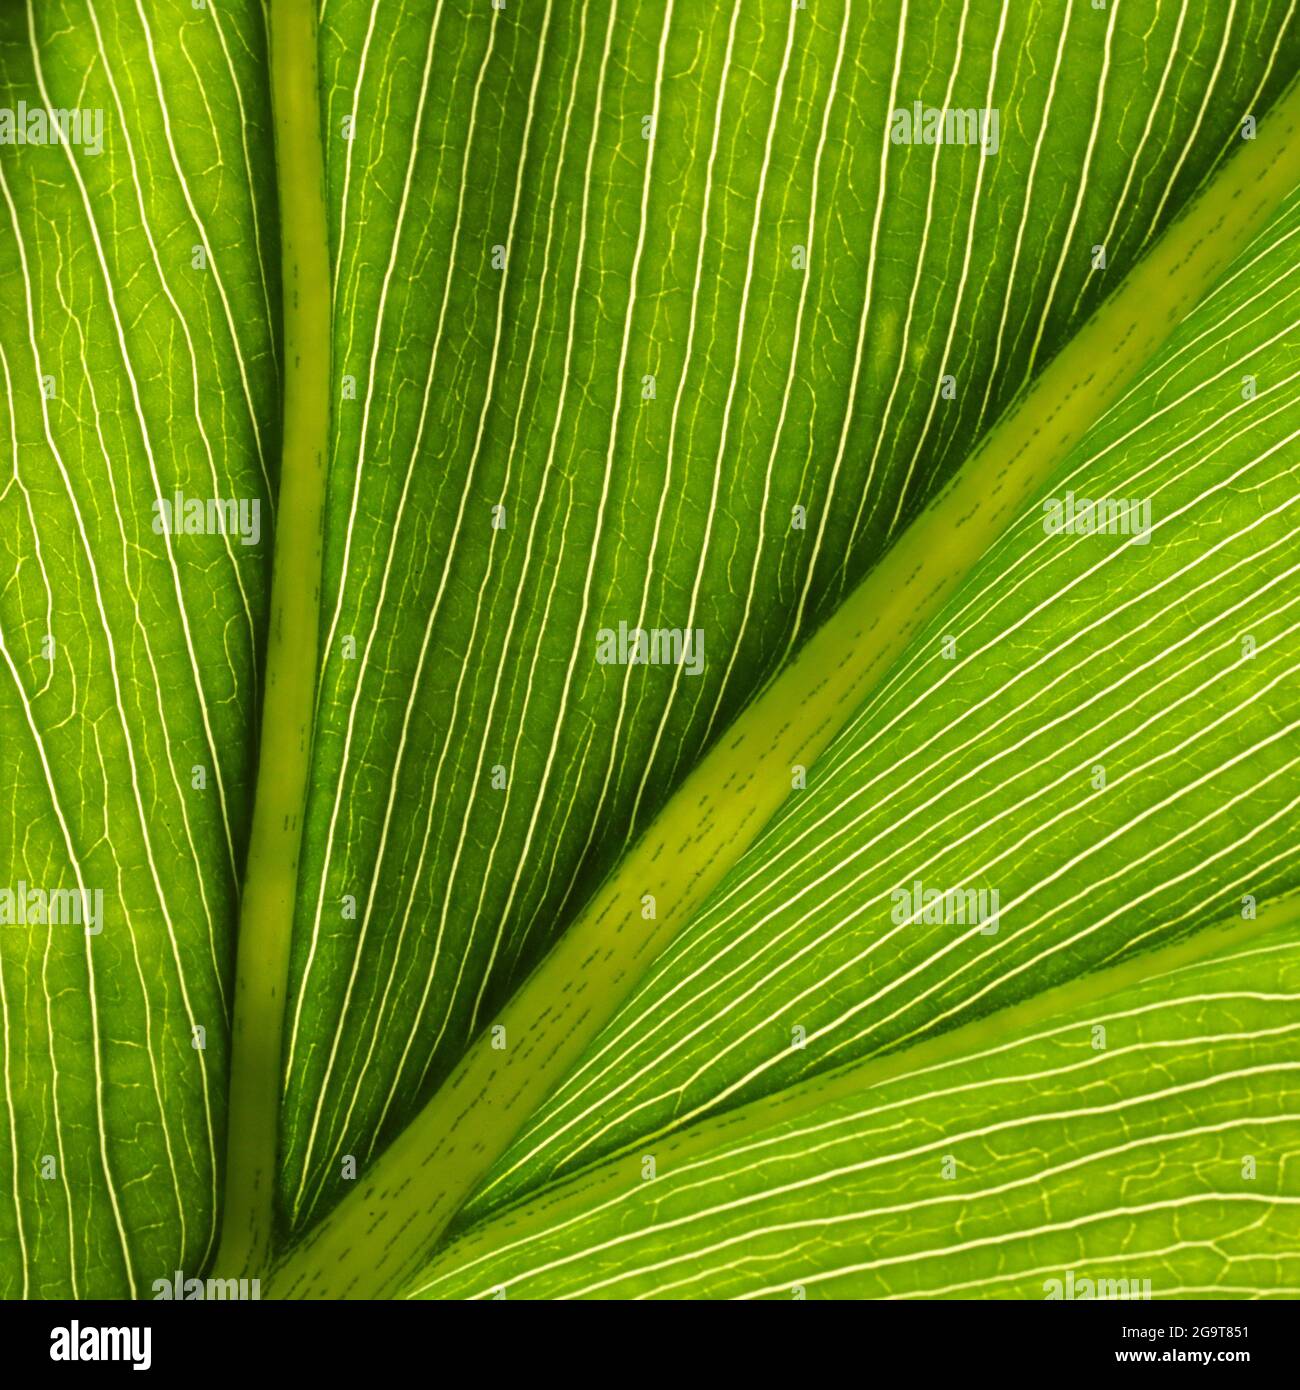 A stunning rich luminous bright yellow green pattern created by a macro view of the veins and cellular structure of a tropical leaf. Beautiful nature Stock Photo